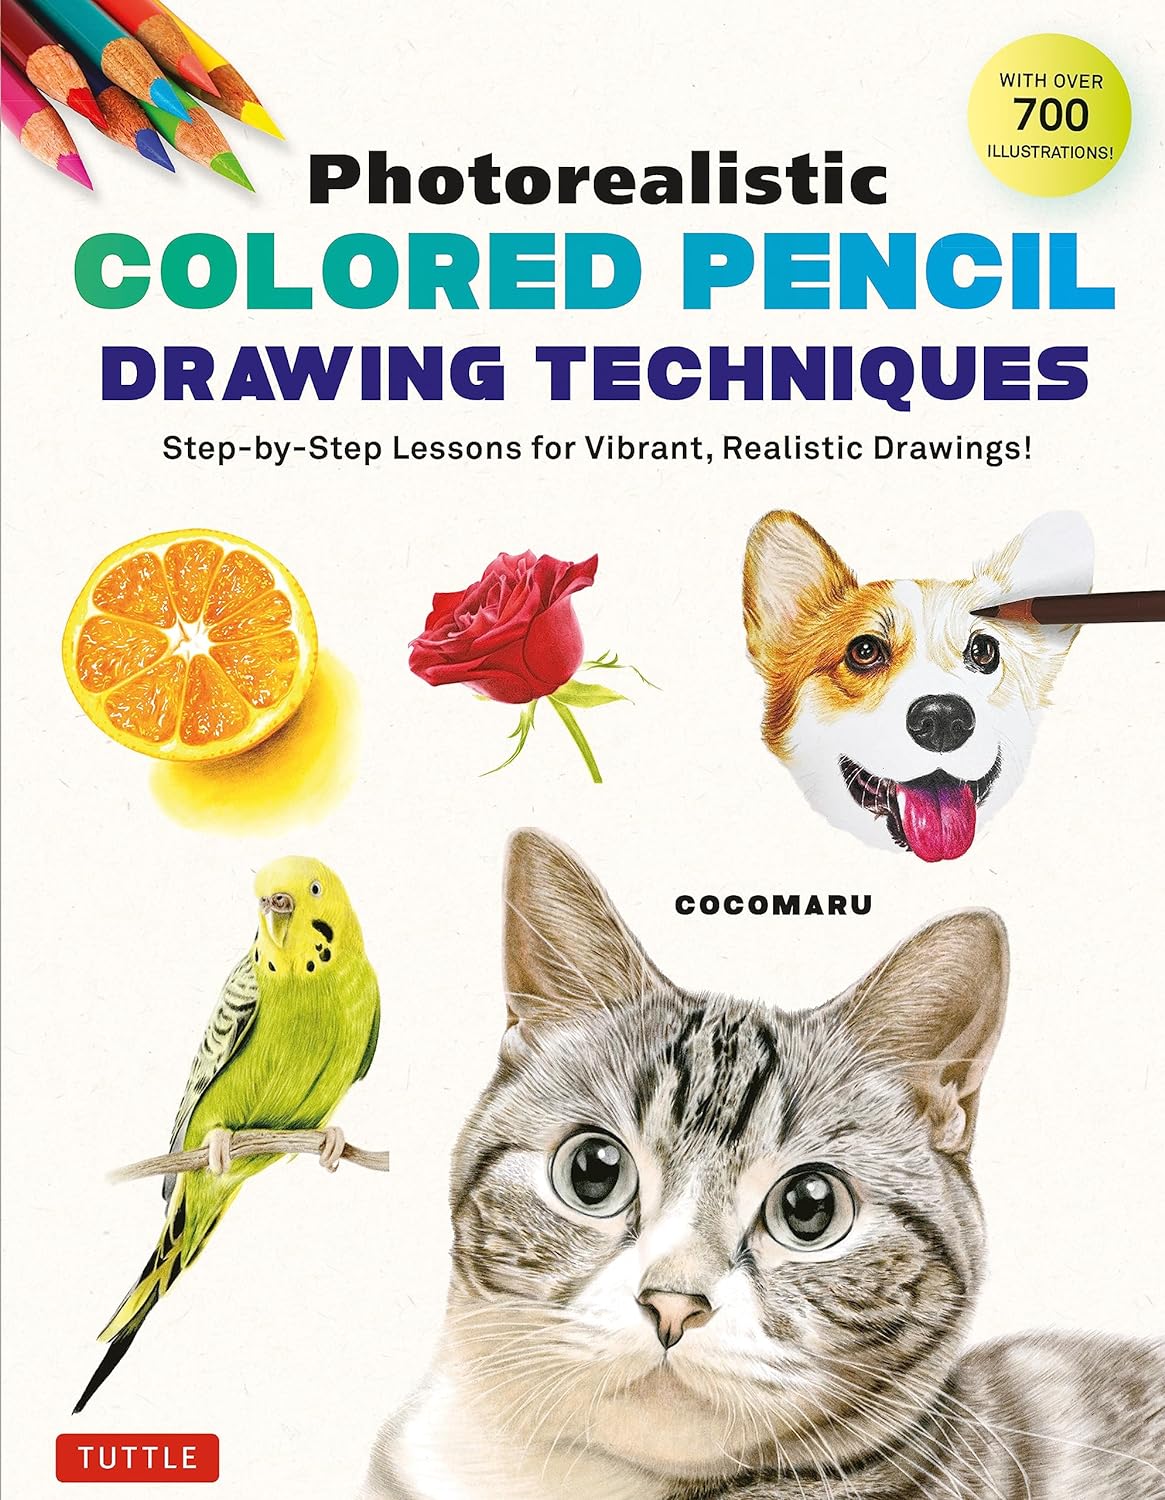 Photorealistic Colored Pencil Drawing Techniques: Step-by-Step Lessons for Vibrant, Realistic Drawings!